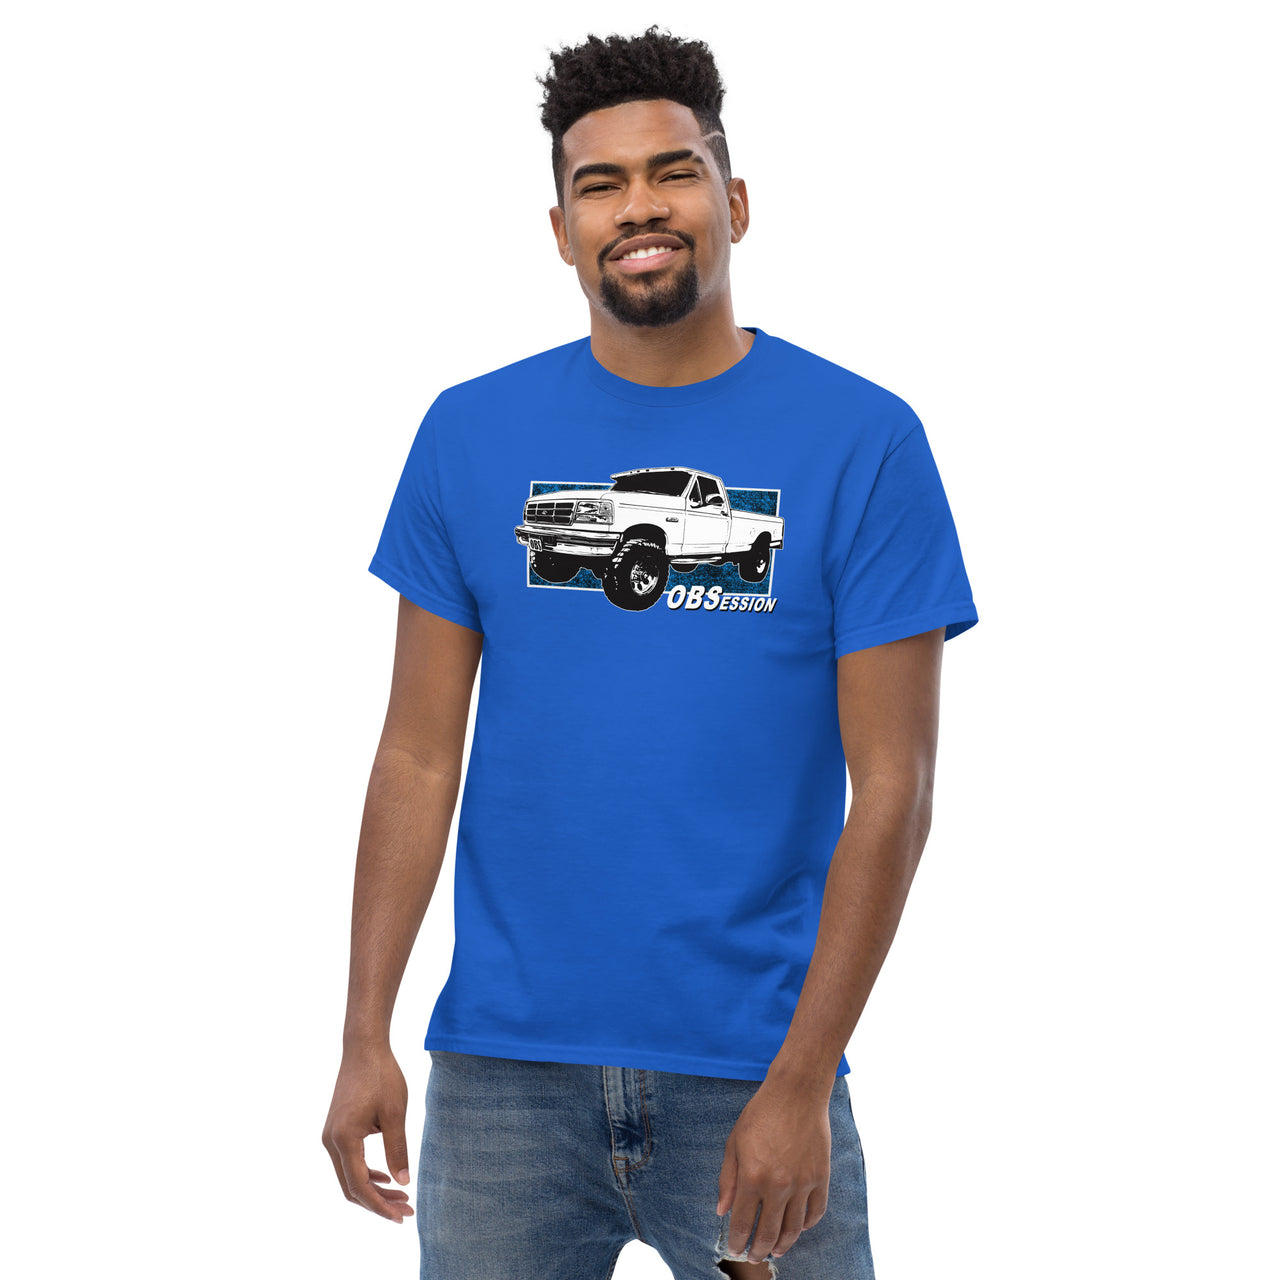 OBS Truck T-Shirt With Single Cab 90s Ford Truck - modeled in Royal